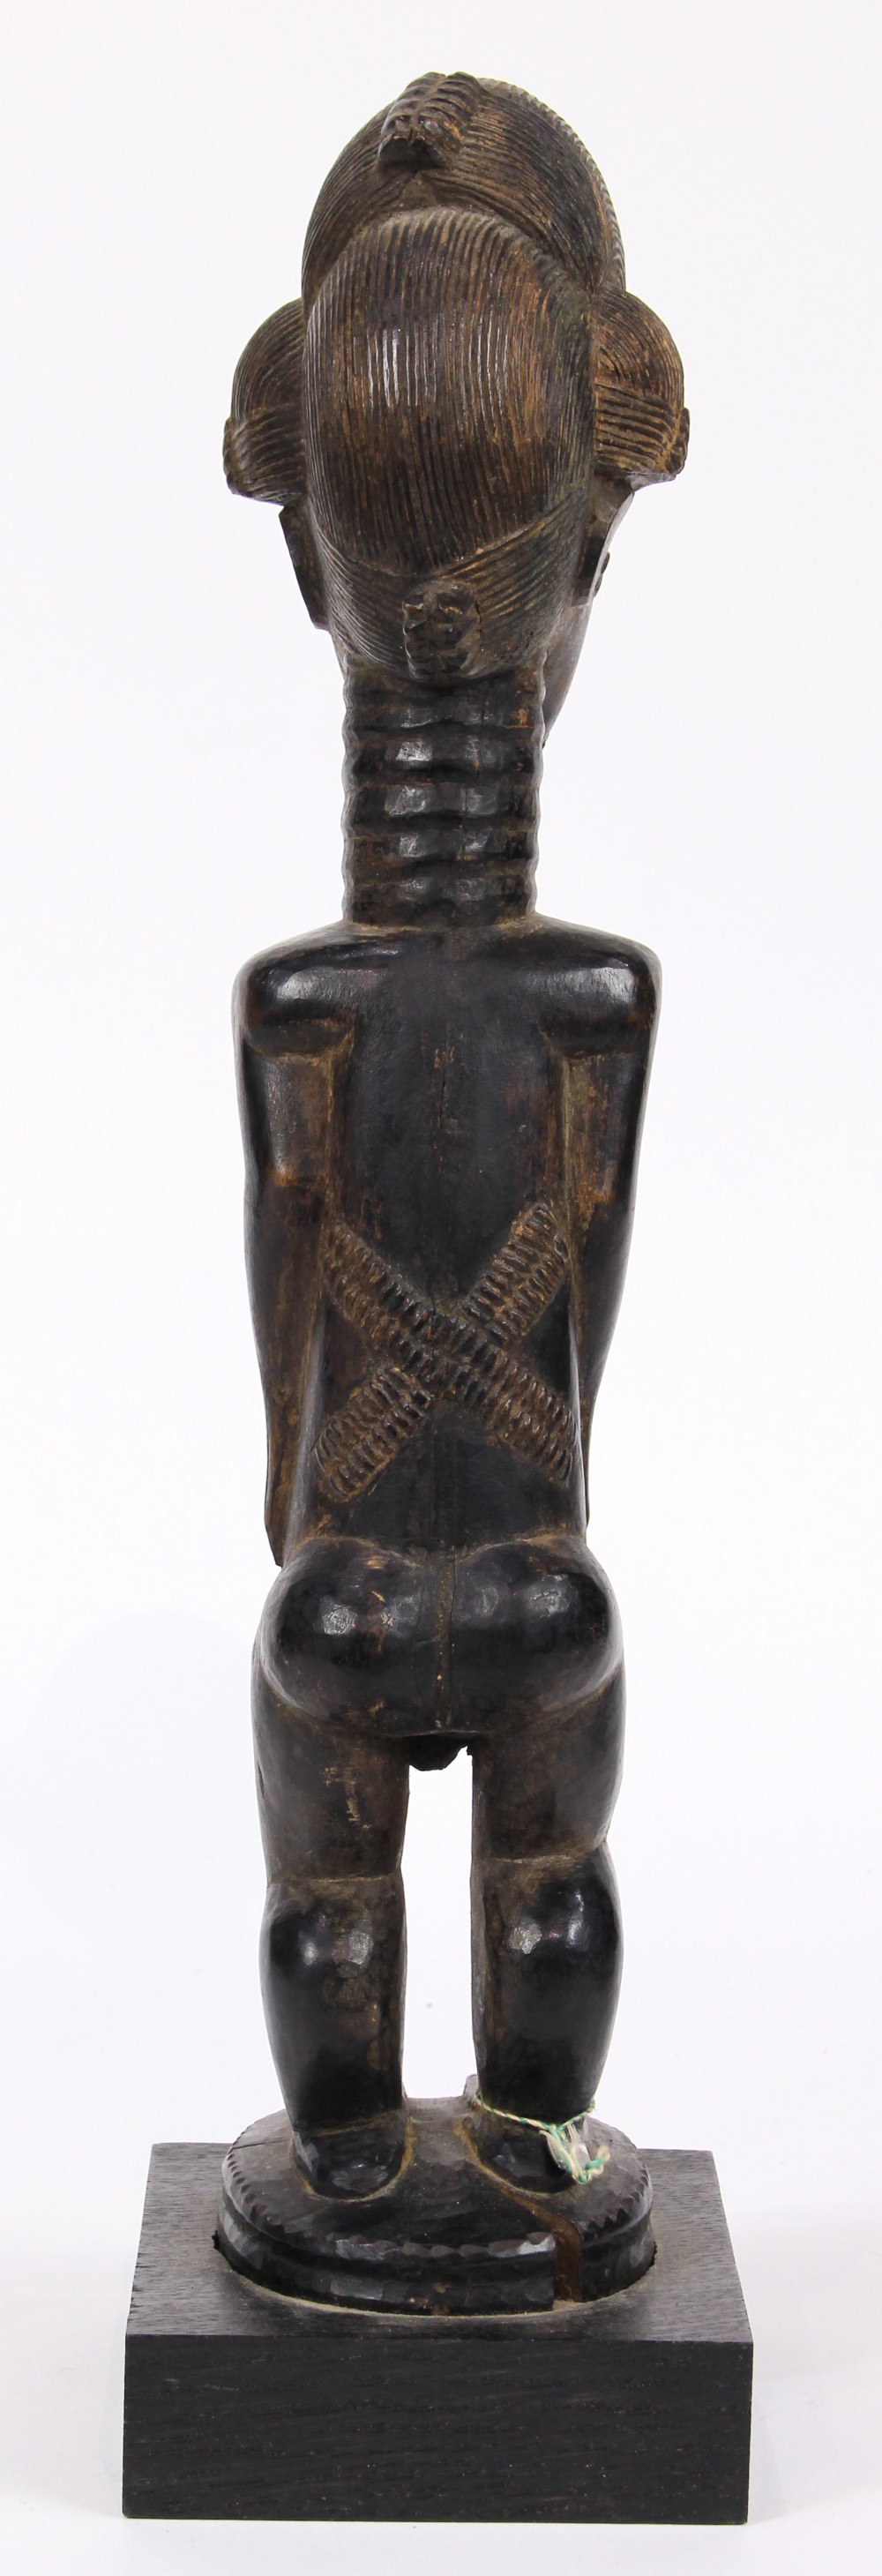 Baule Cote d'Ivorie standing male figure, finely and sensitively carved of blackened wood, with a - Image 4 of 5